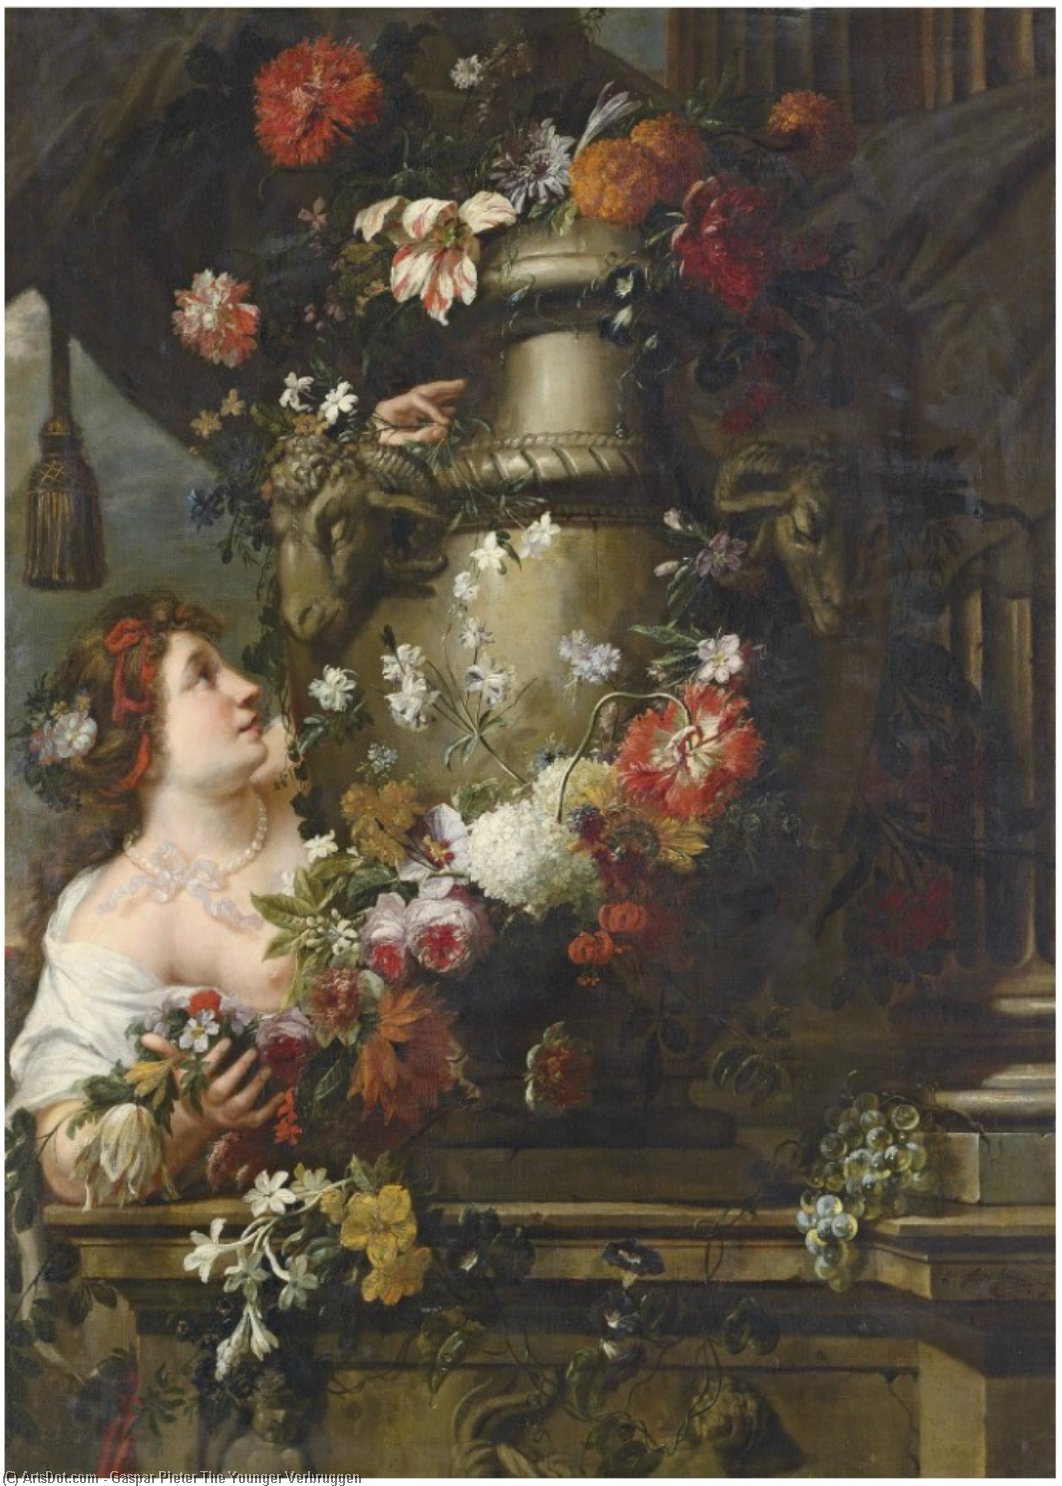 Buy Museum Art Reproductions A lady adorning a sculpted urn with roses, lilies and other flowers, with a draped column and grapes on a stone ledge by Gaspar Pieter The Younger Verbruggen (1664-1730, Belgium) | ArtsDot.com